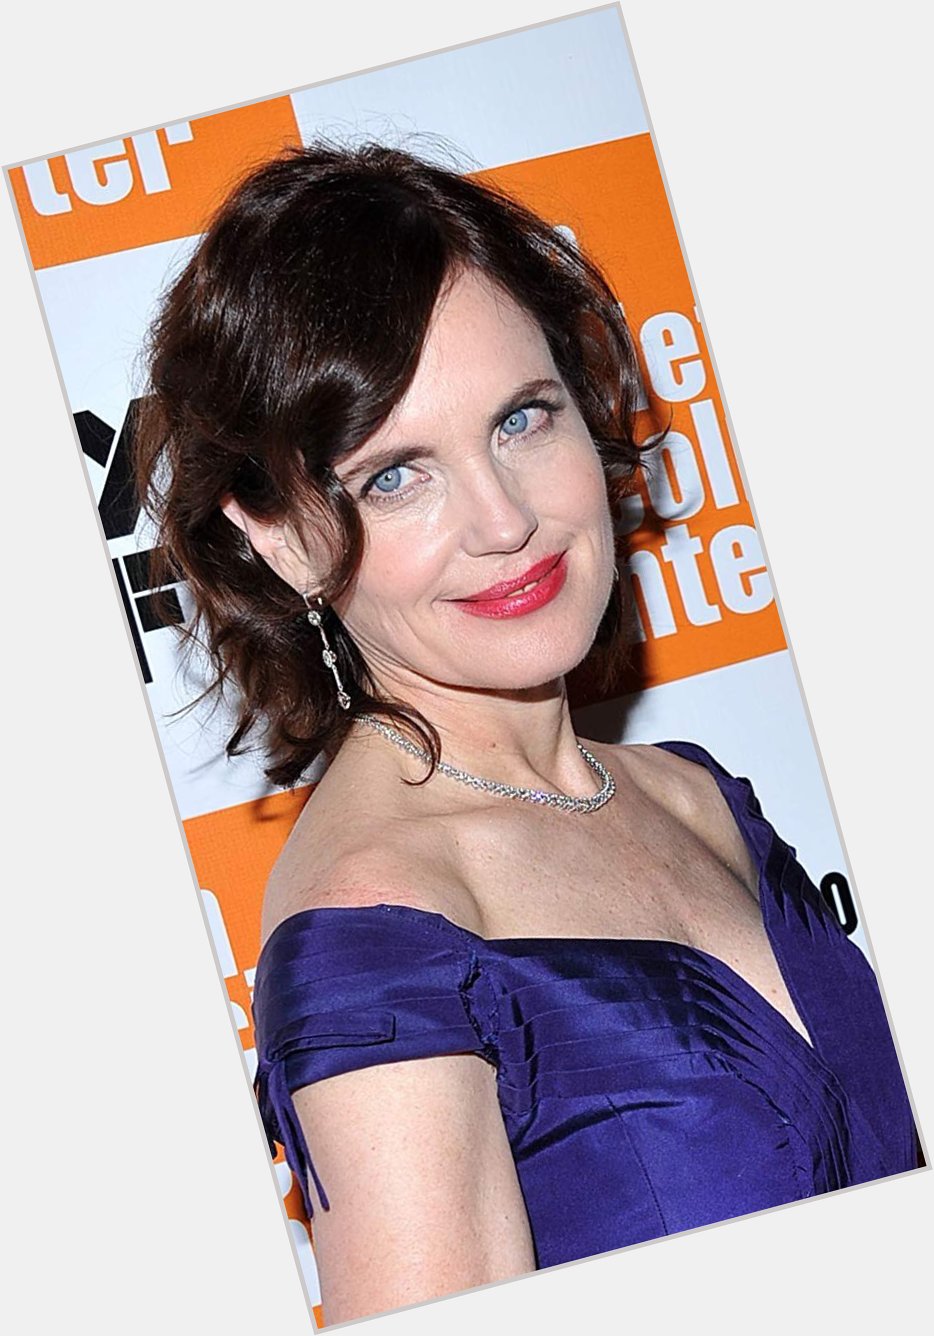 Happy 58th birthday to Elizabeth McGovern, born on this date in 1961. 